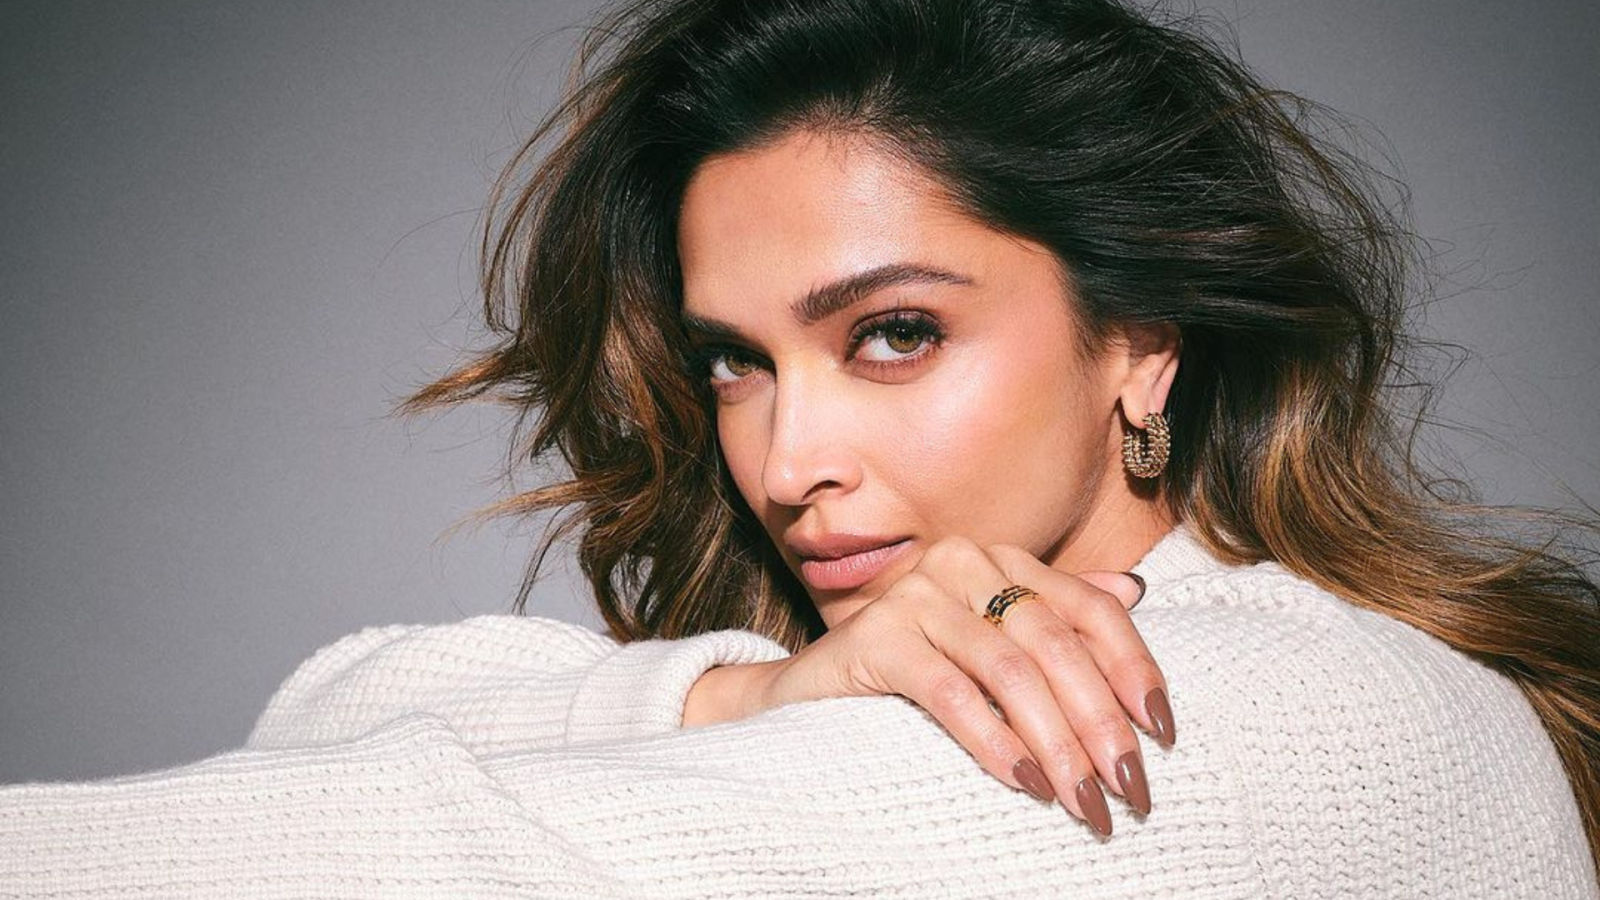 15 Hairstyles of Deepika Padukone that are Worth Trying - Candy Crow